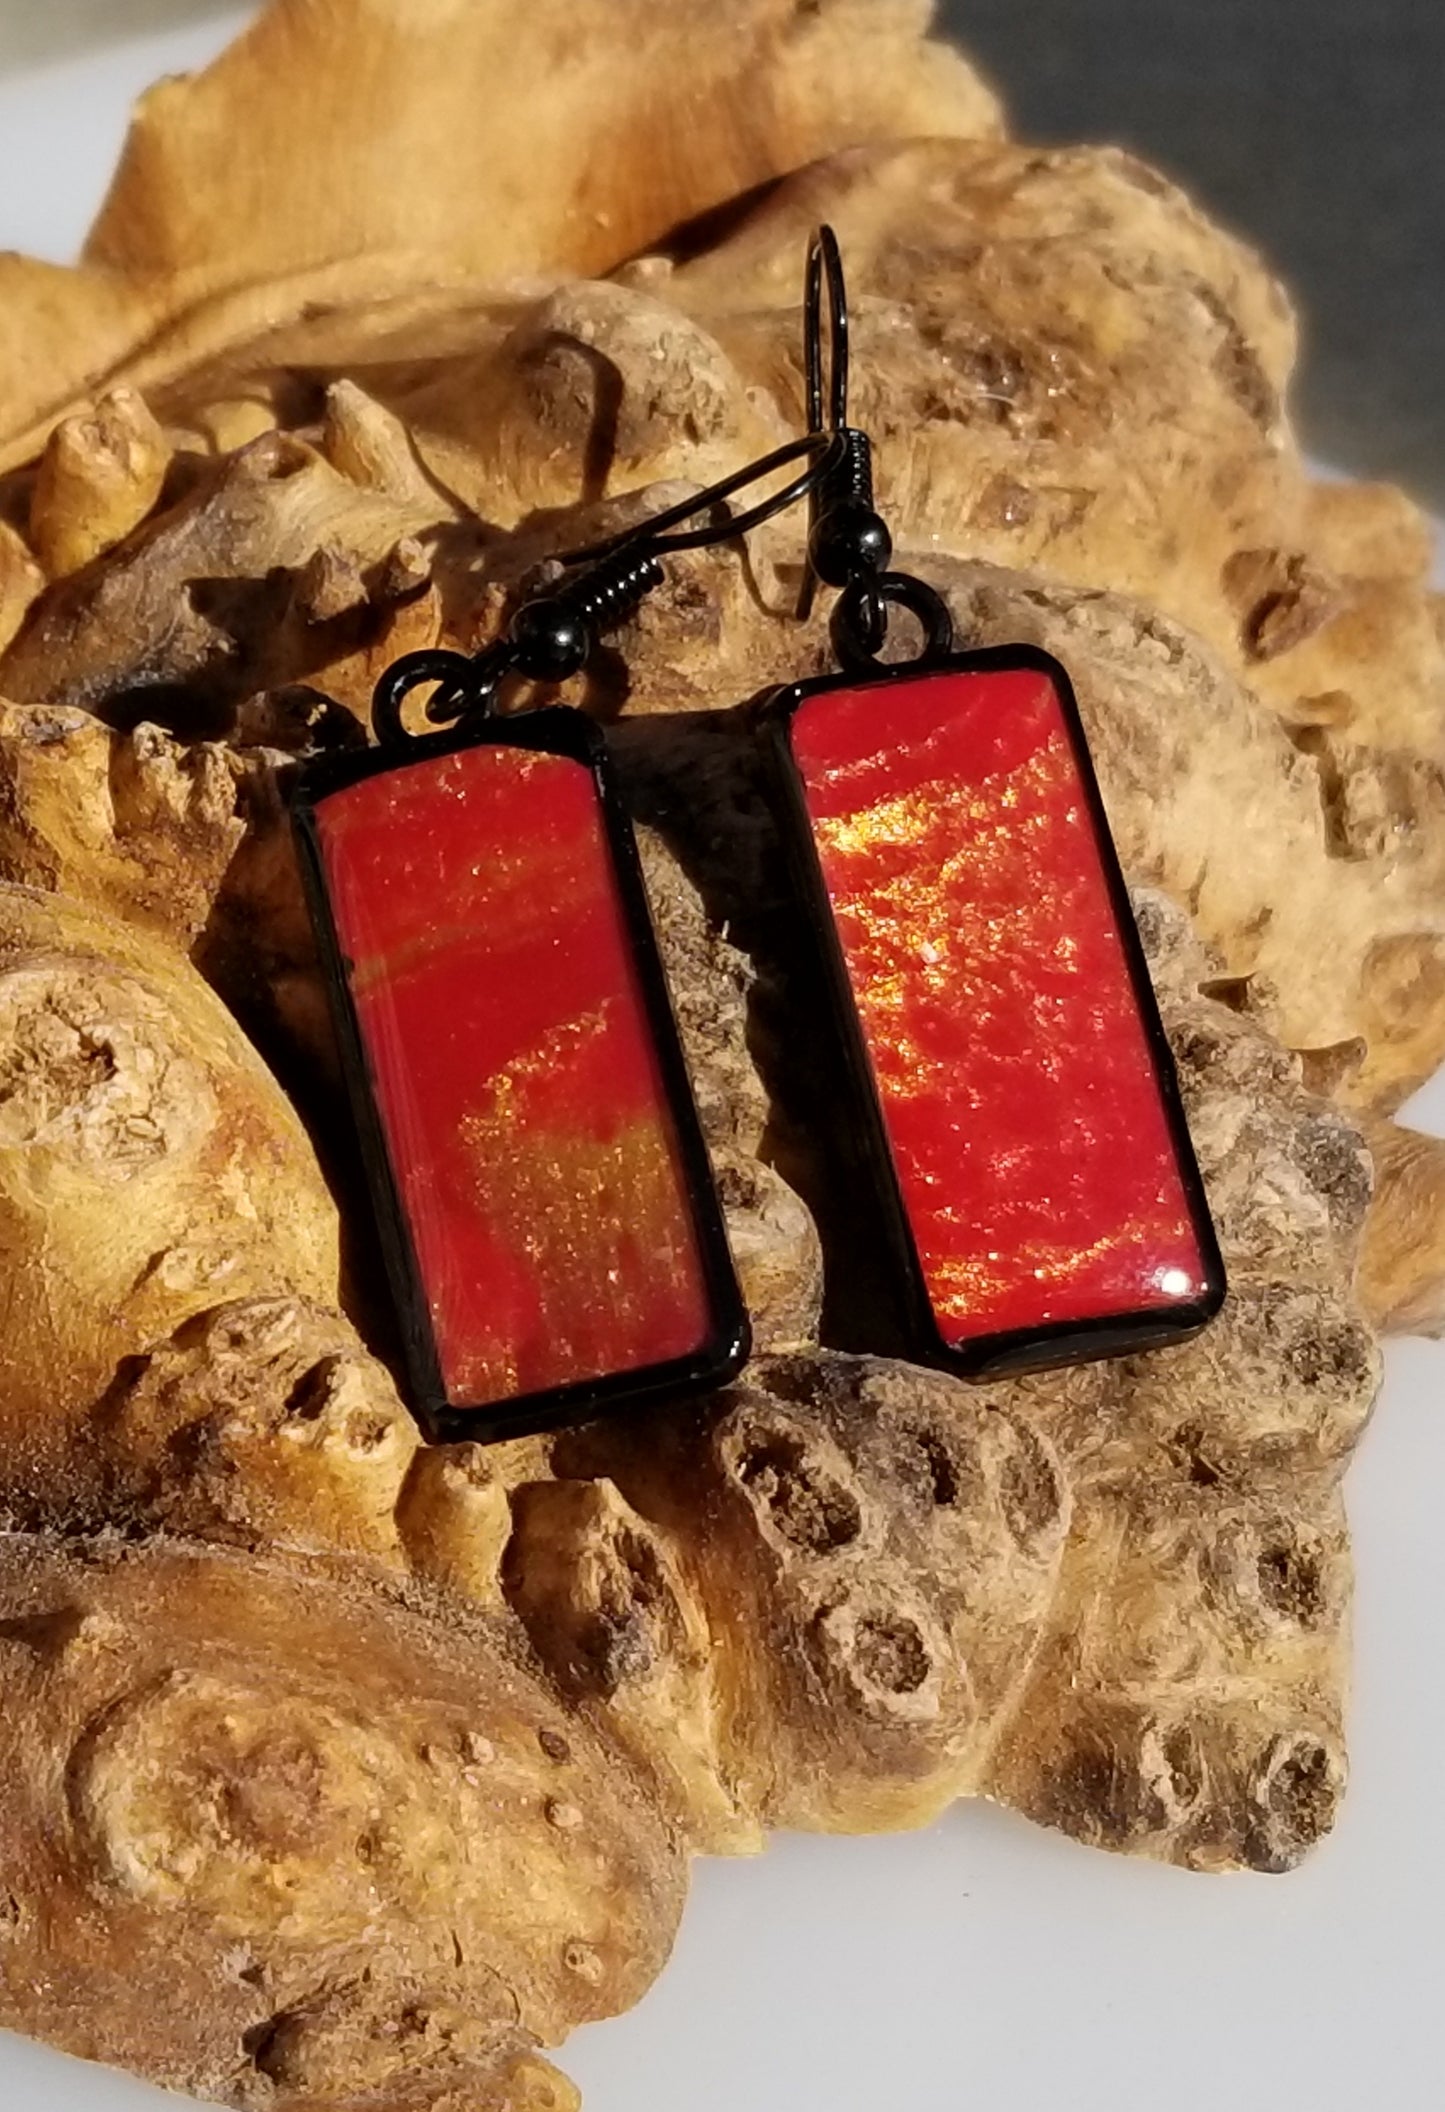 Resin Design with Resin Dome / Silver Tray or Black TrayWire Hook Earrings